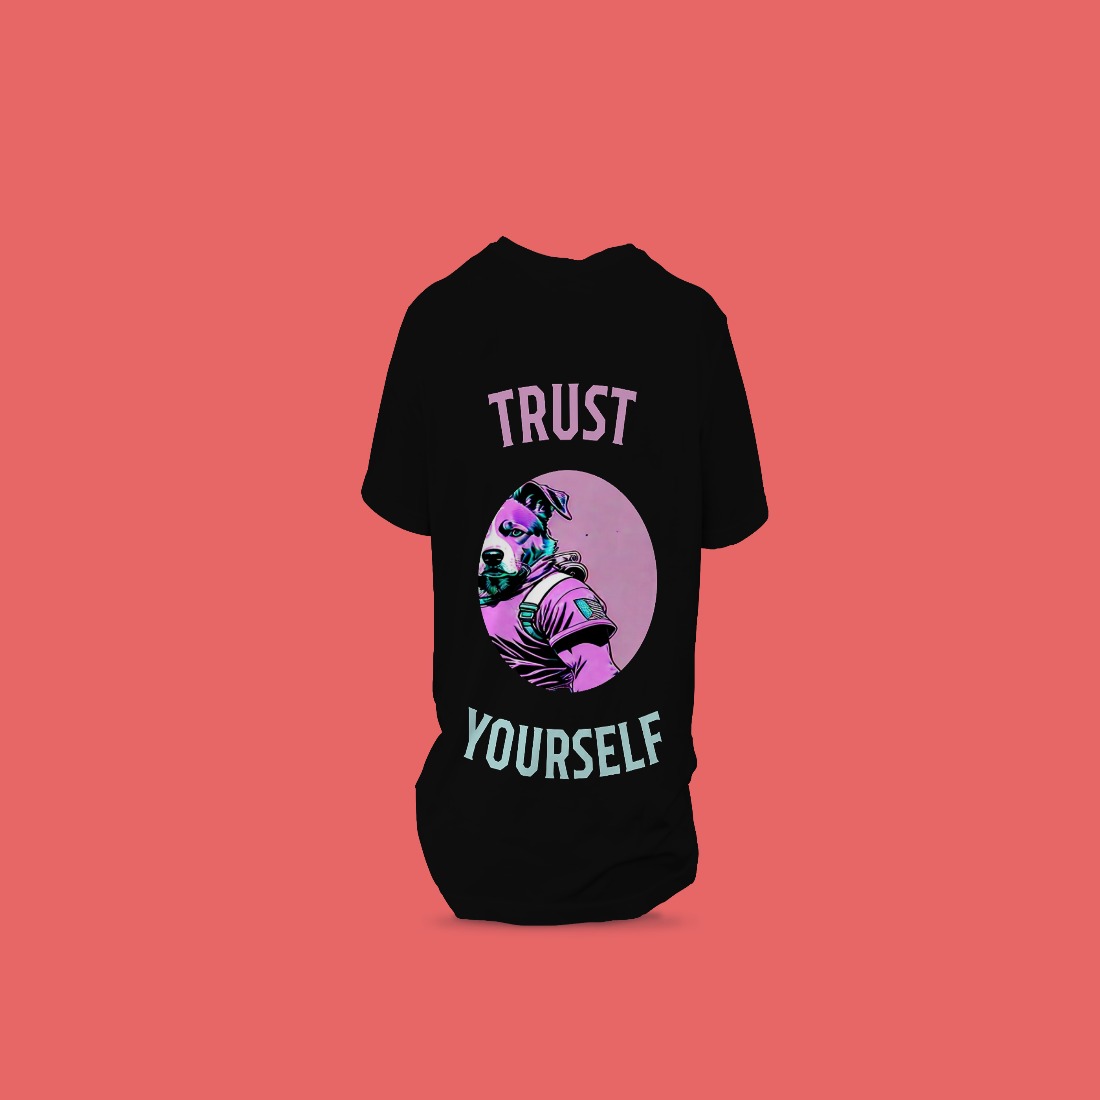 TRUST YOURSELF - T-SHIRT DESIGN cover image.